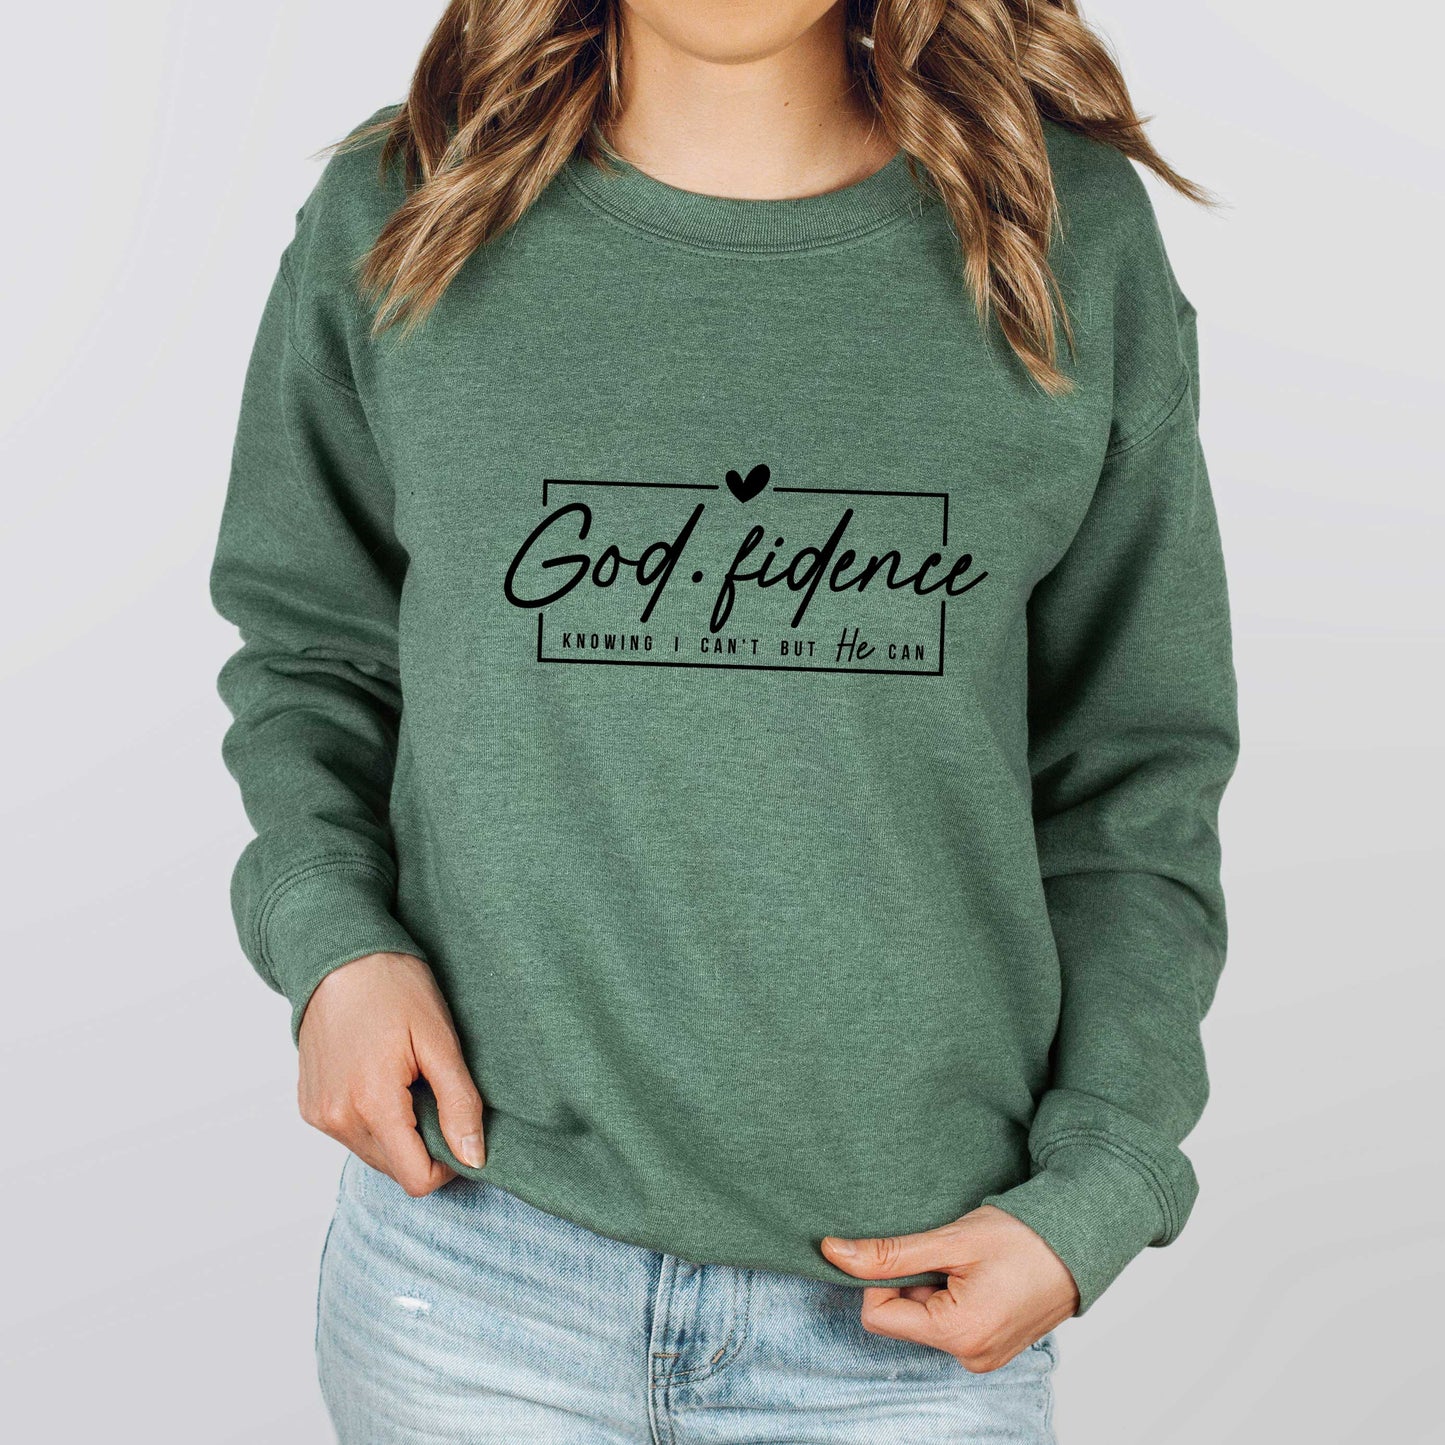 Godfidence Knowing I Can't But He Can | Sweatshirt